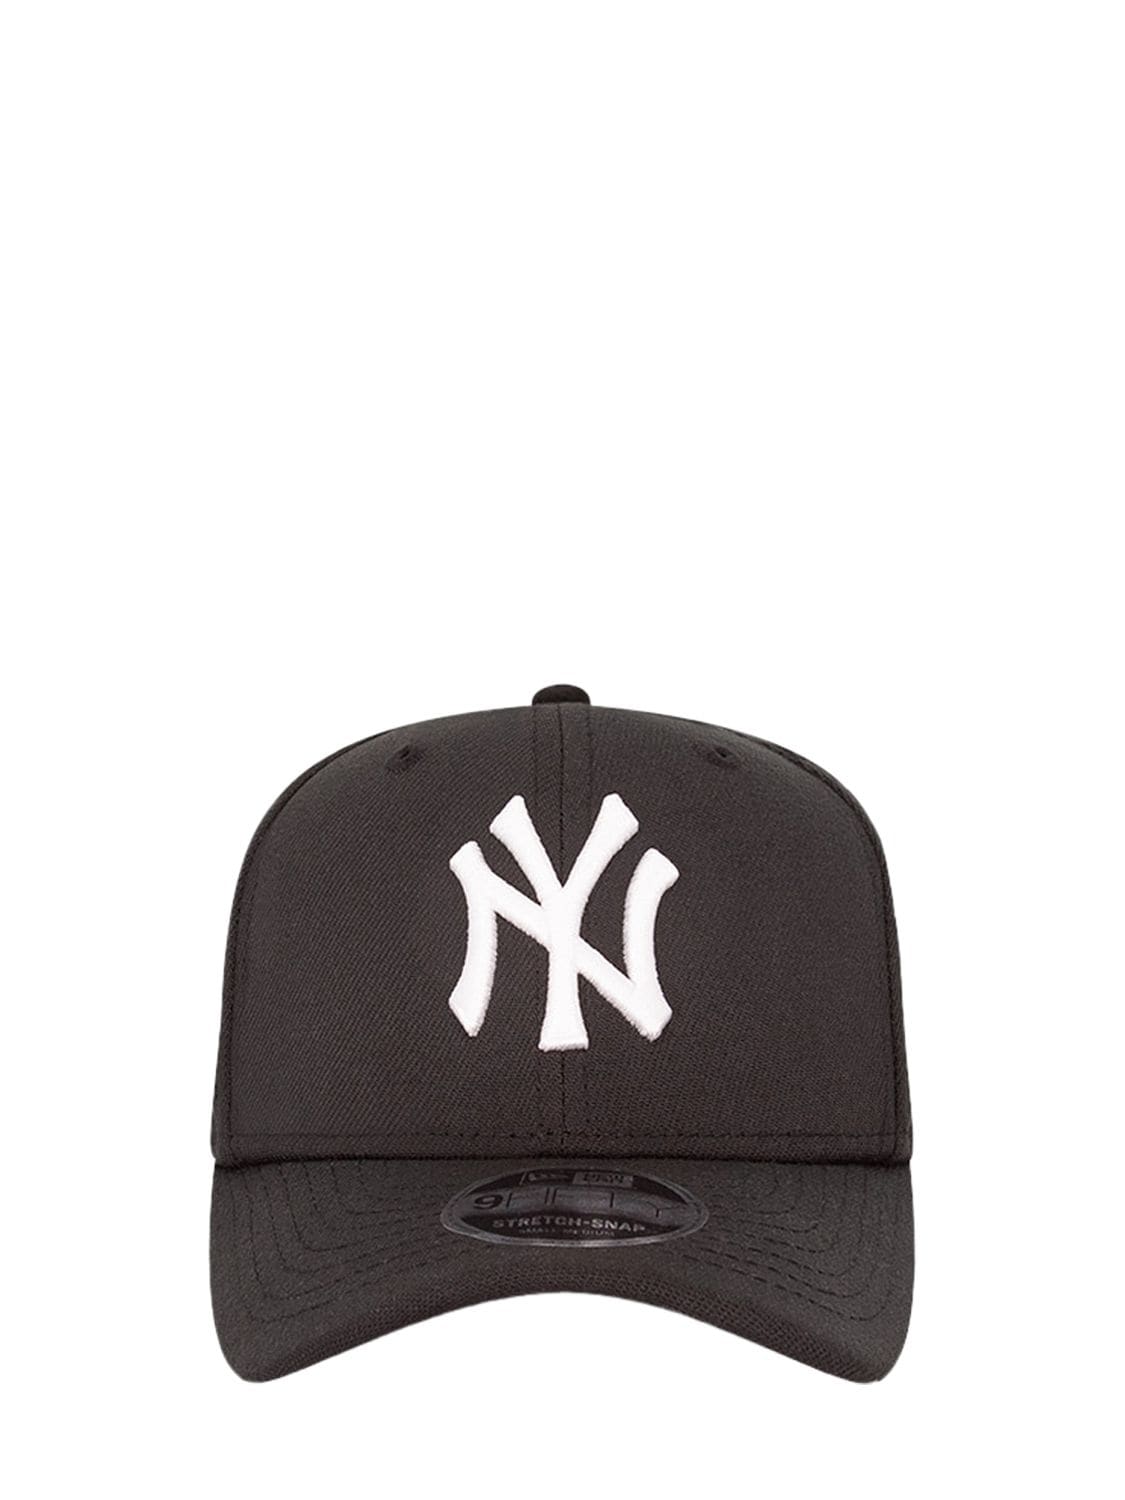 Image of 9fifty Stretch Snap Yankees Hat